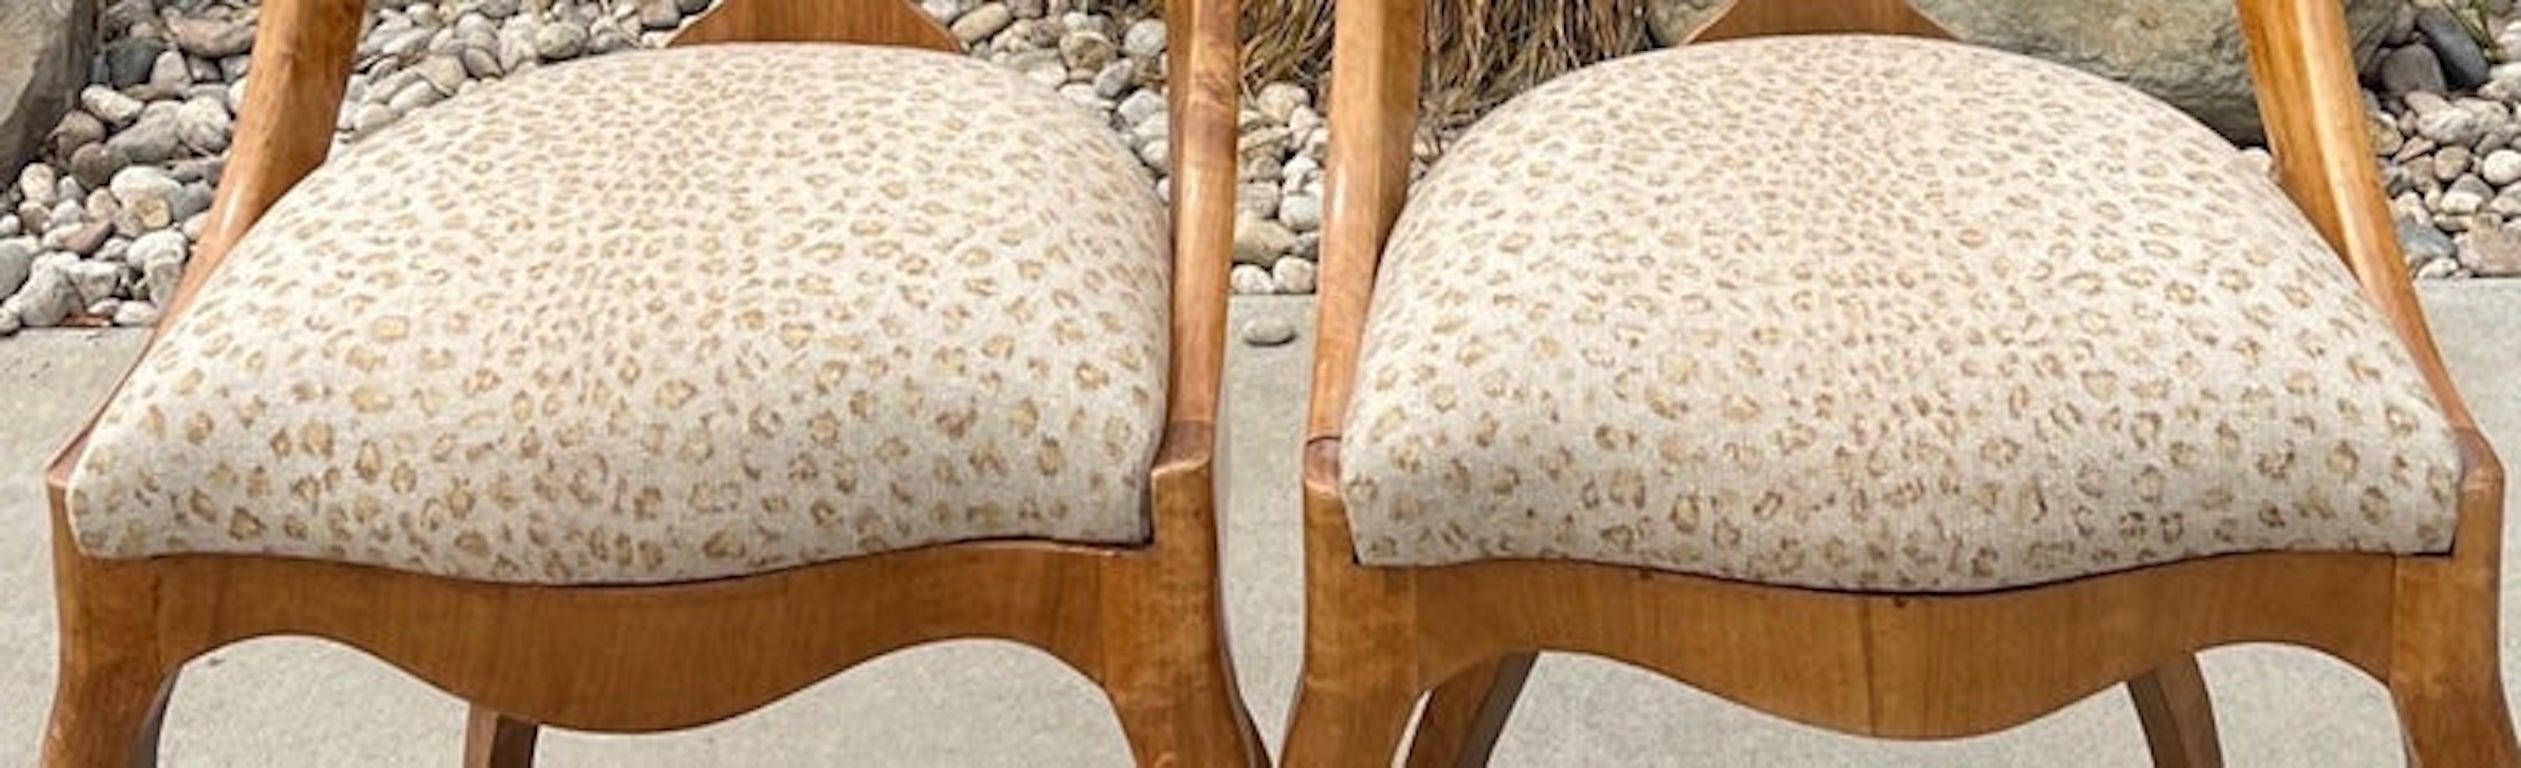 Pair of Austrian 1840s Biedermeier Side-Chairs with Fabric Covered Seats For Sale 9